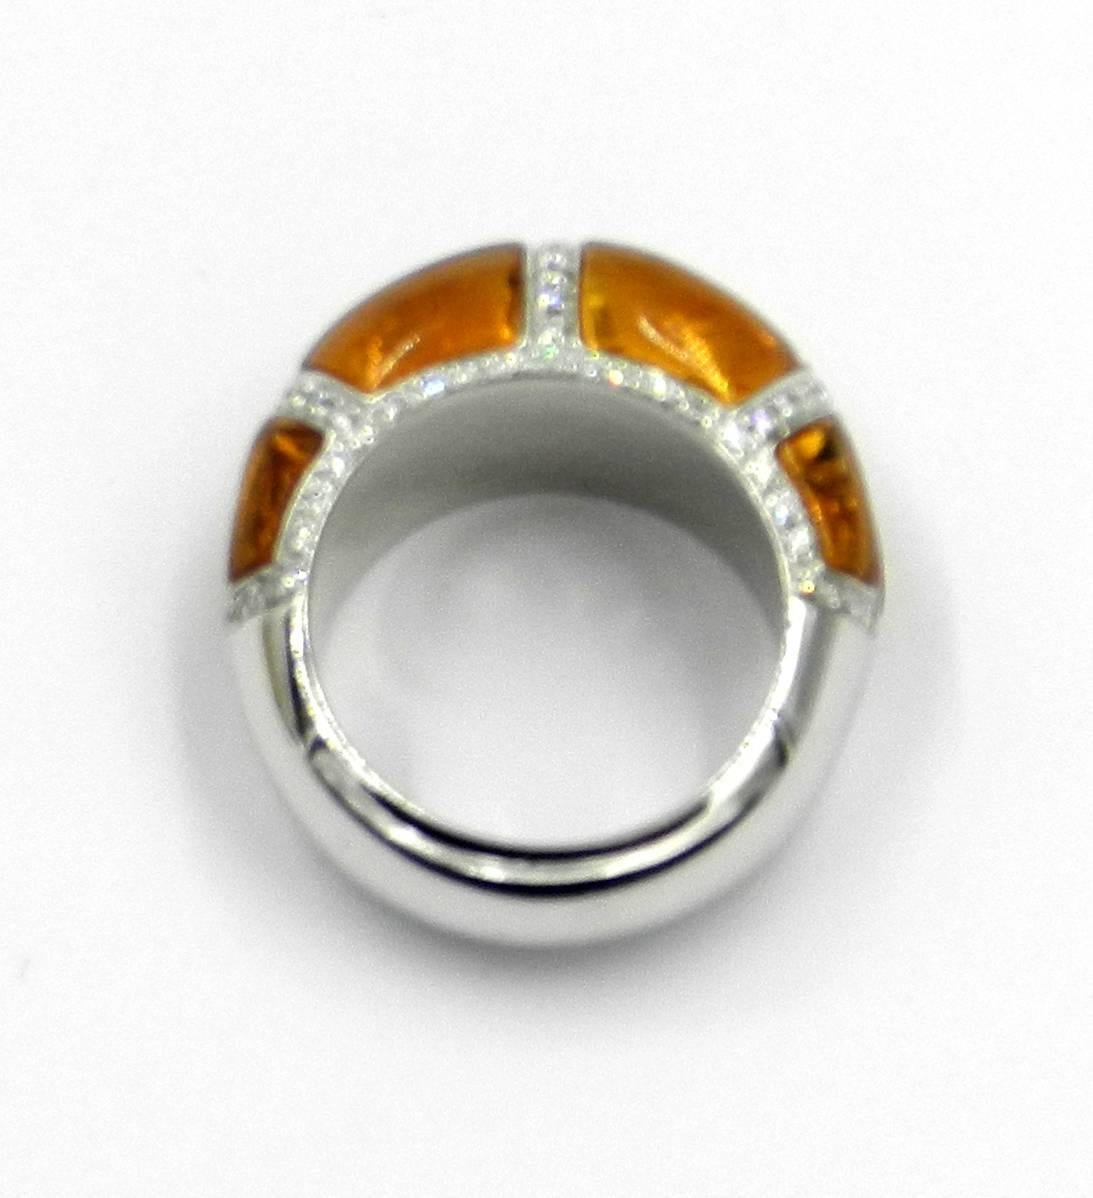 18KT White Gold RING set with eight natural CITRINES  perfectly cut to fit the ring shape and White Diamonds
Made In Italy by GARAVELLI designed by Luca Valerani
Finger size 56 ,  US 7.5
18 kt GOLD  gr : 11,40
DIAMONDS ct : 0,64
SEMIPRECIOUS NATURAL